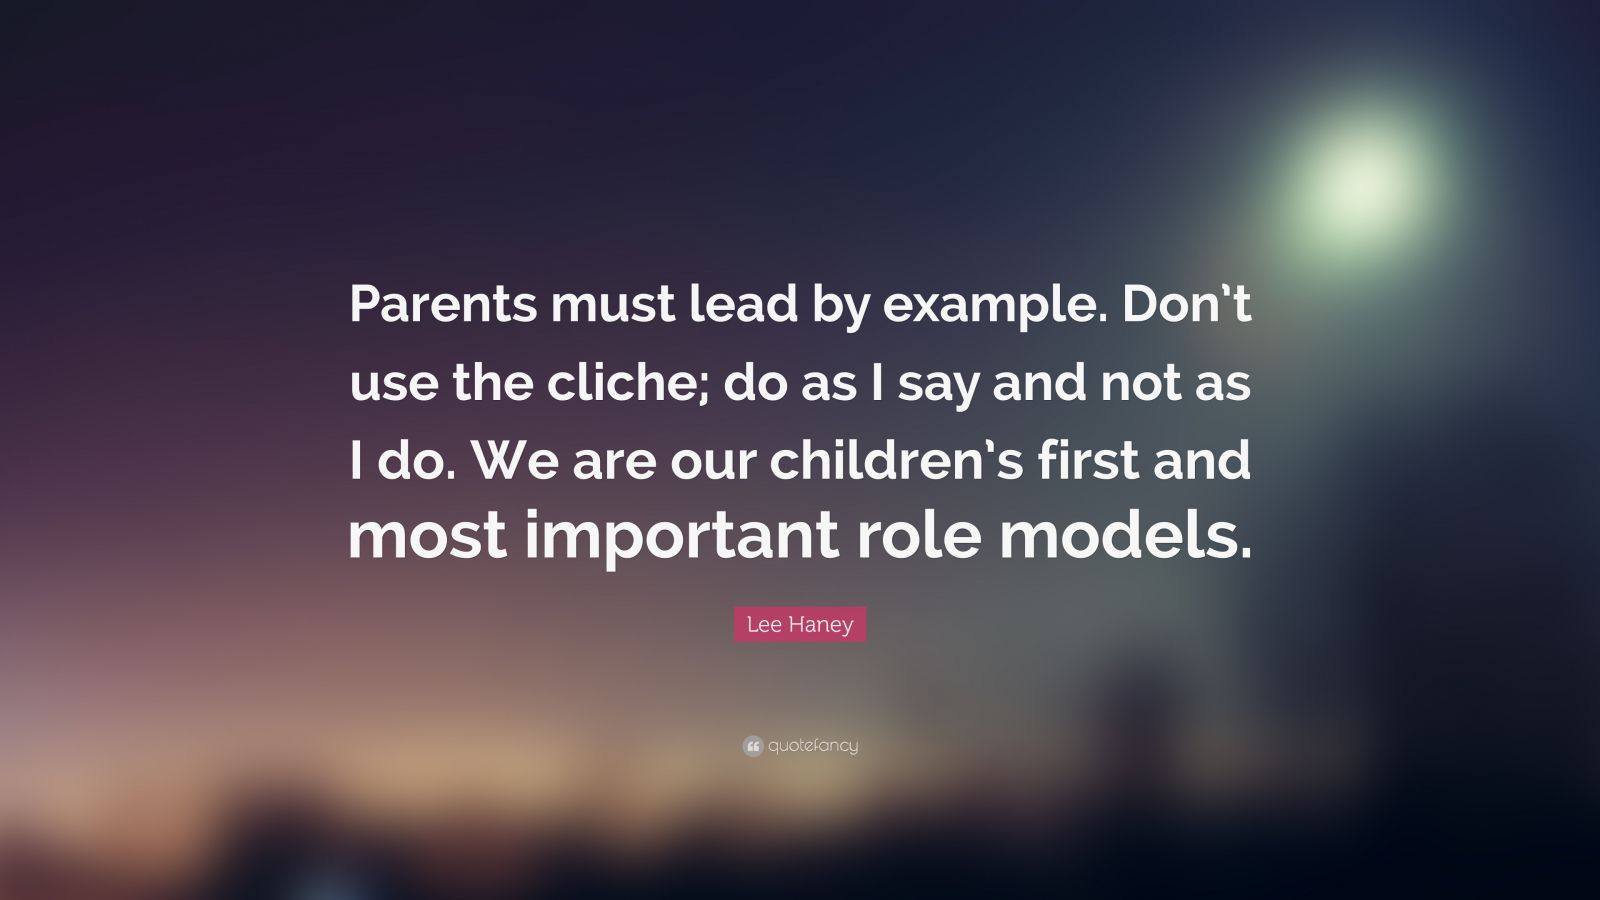 Parents must lead by example. Don't use the cliche